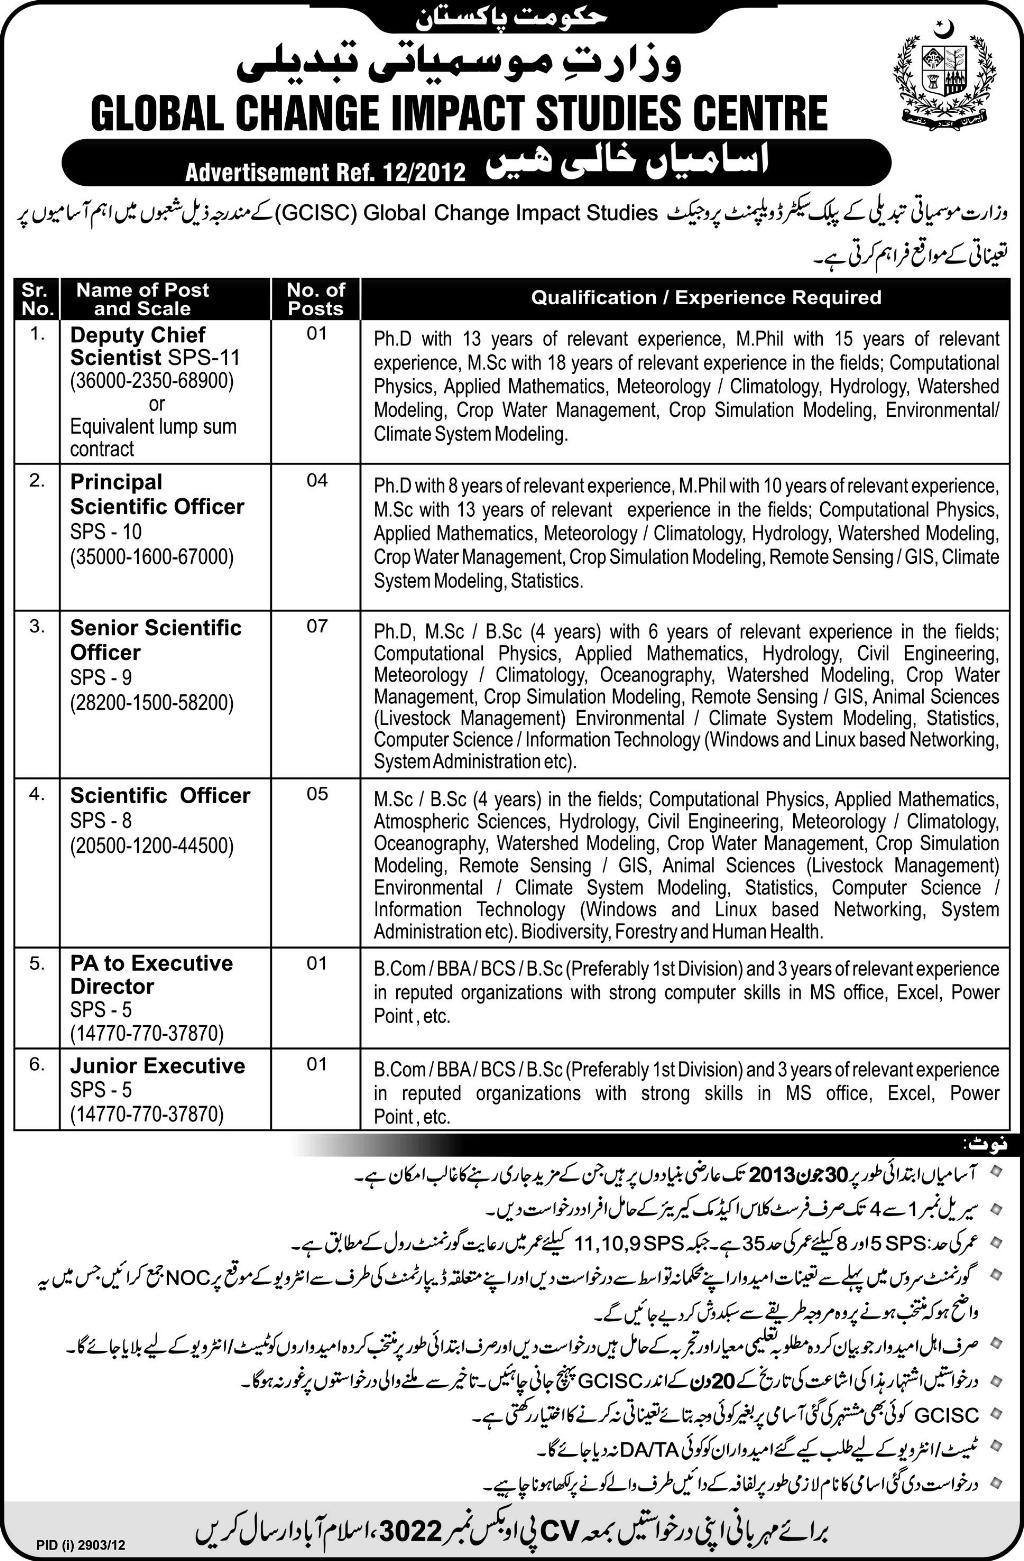 Ministry of Climate Change Pakistan Jobs 2012-2013 for Global Change Impact Studies Centre (GCISC)